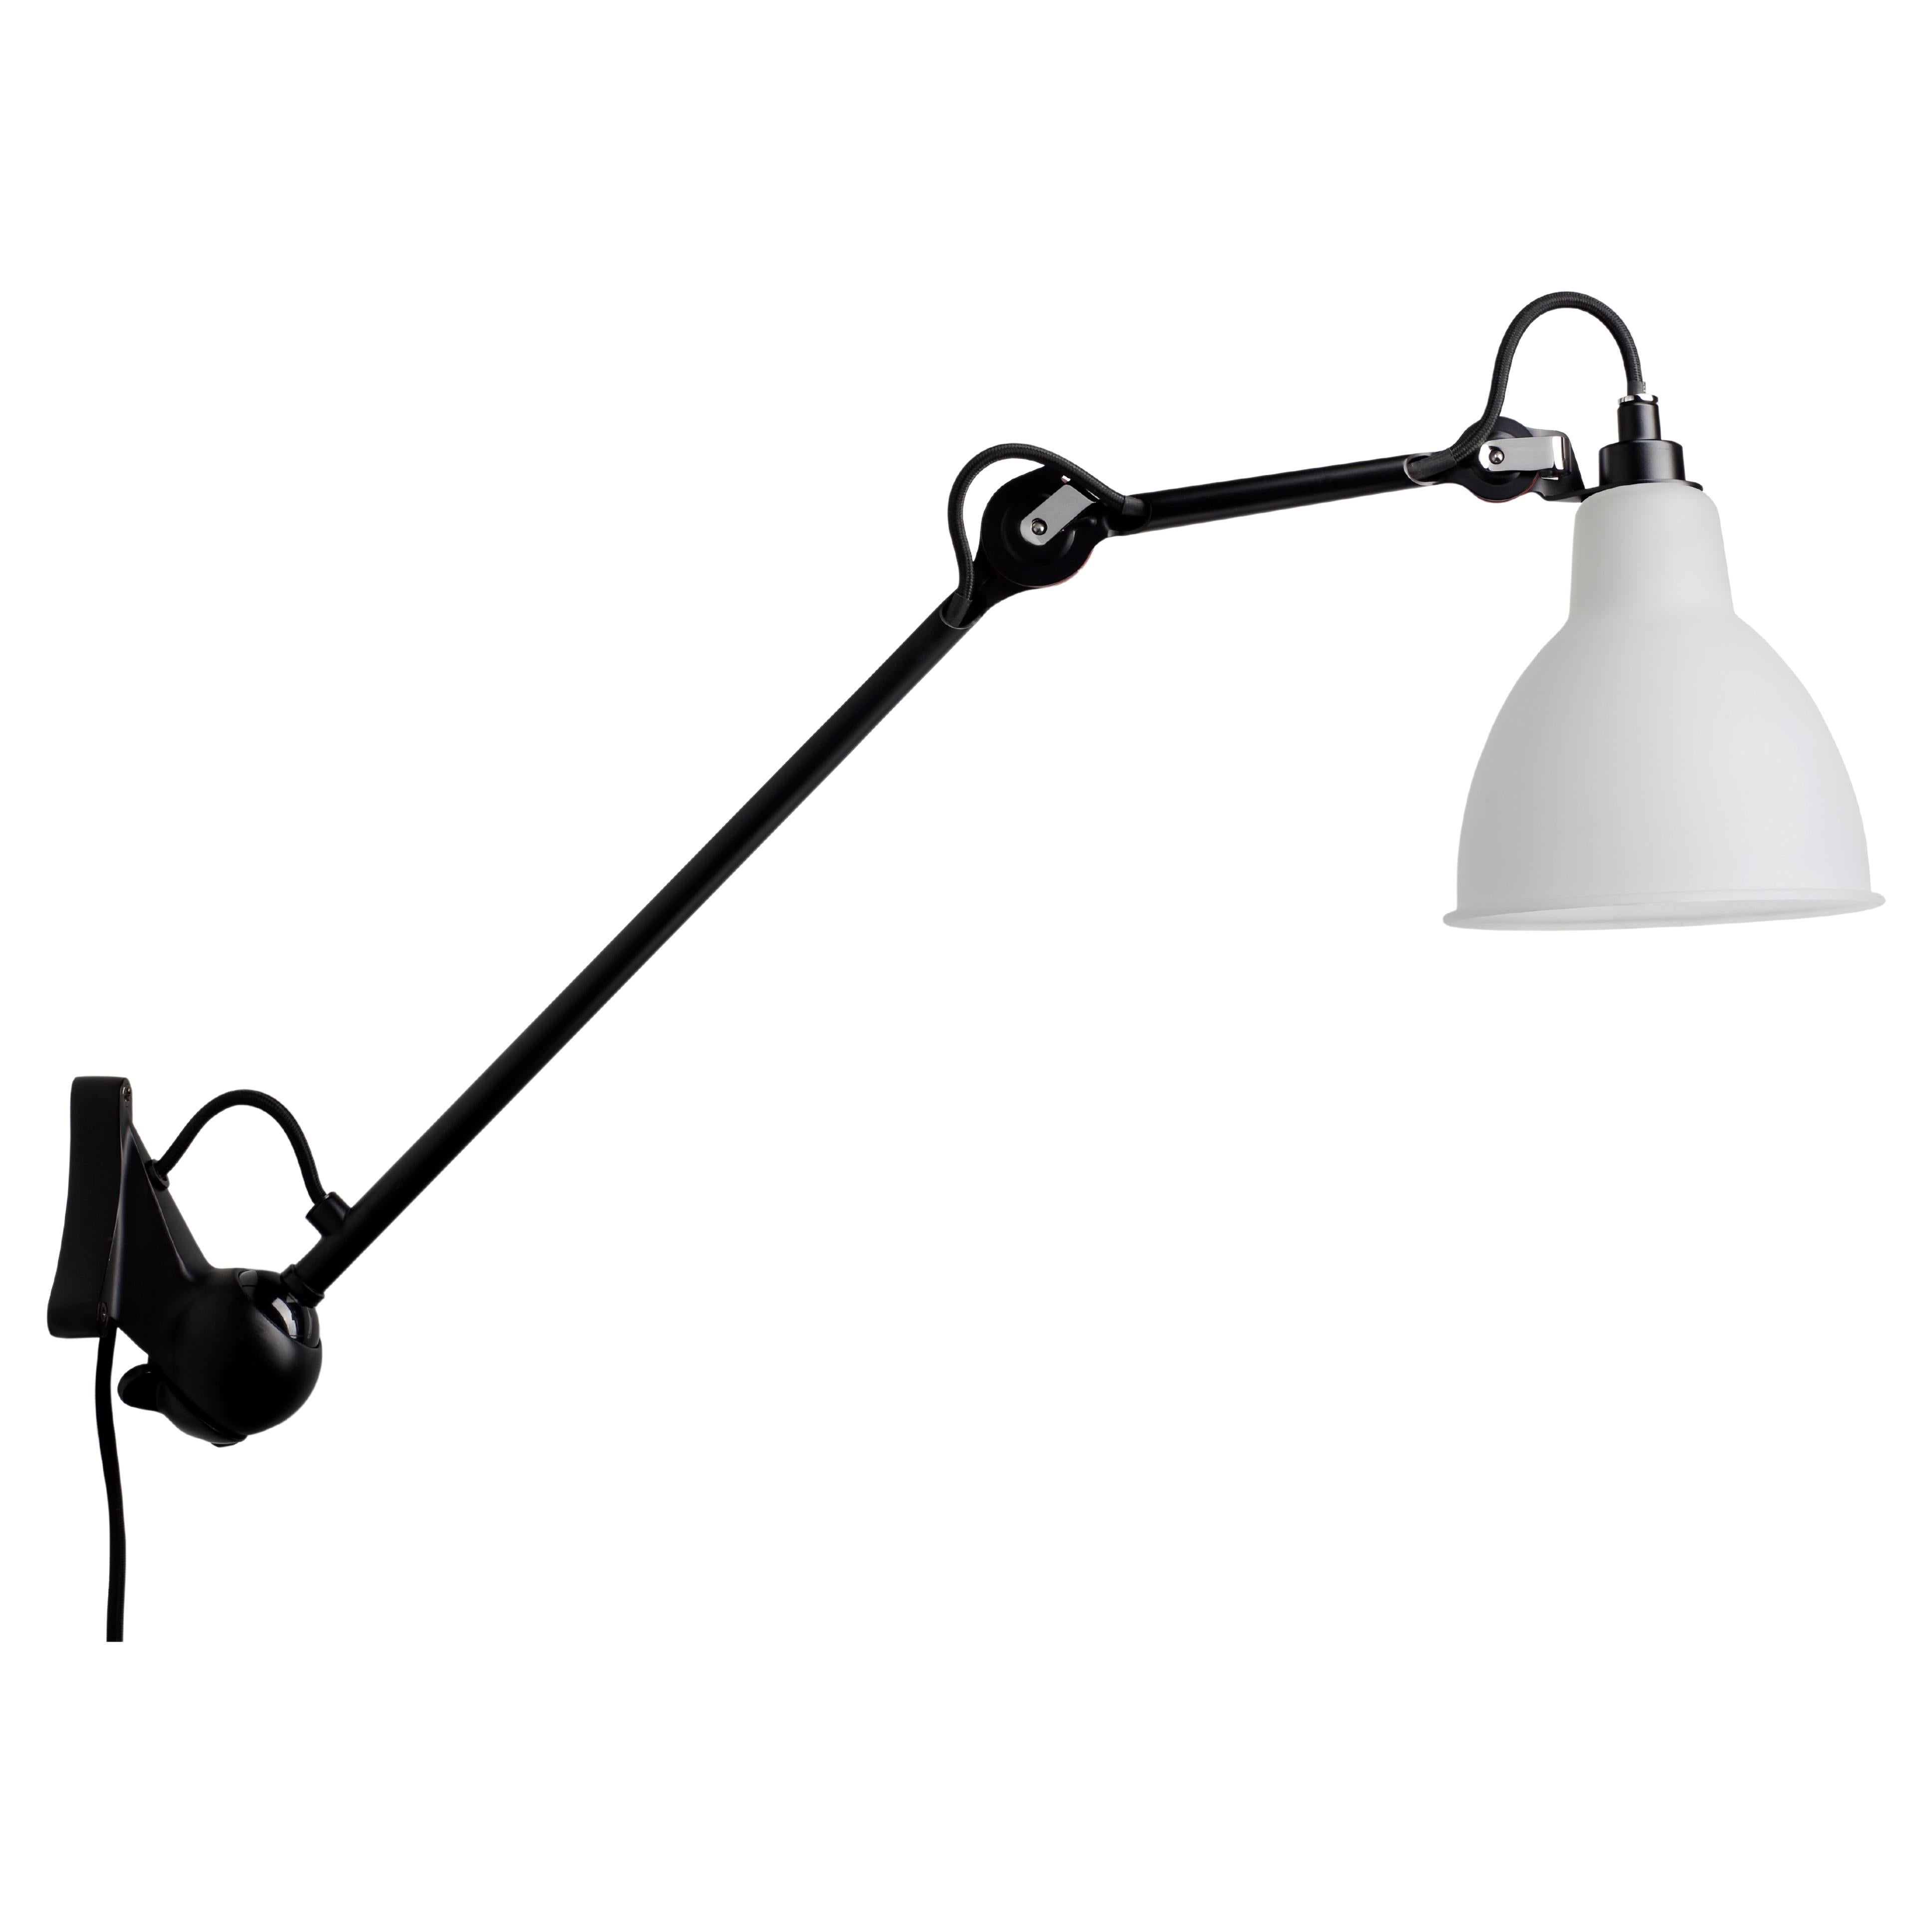 DCW Editions La Lampe Gras N°222 Wall Lamp in Black Arm and Frosted Glass Shade